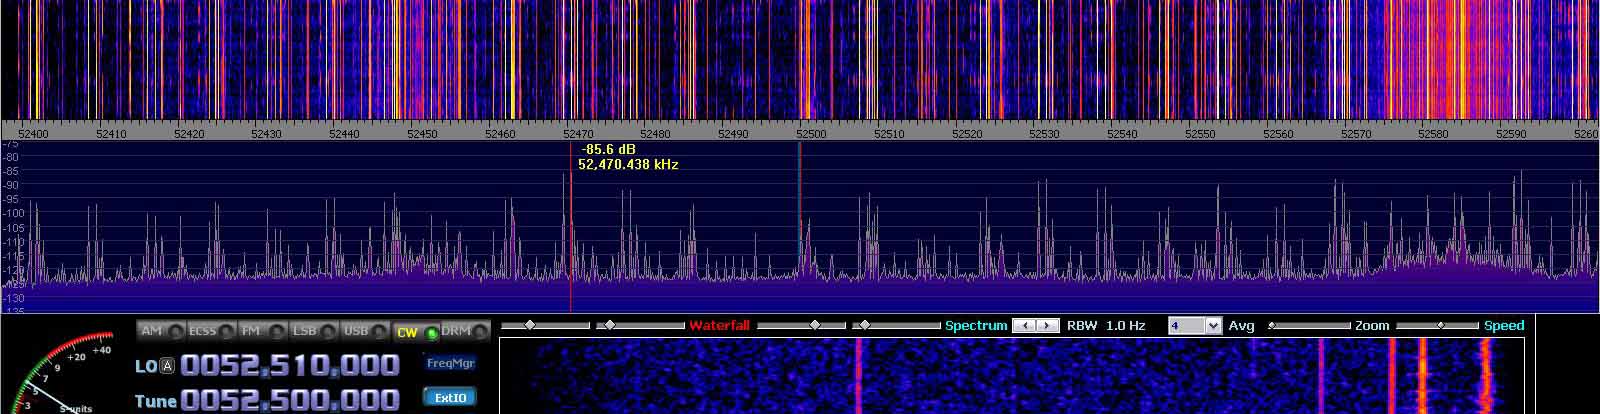 2014-07-04 52.500 MHz +- 100 kHz - Strong Es - 4-el dipole array with ends to St P - (c) OH7HJ.JPG